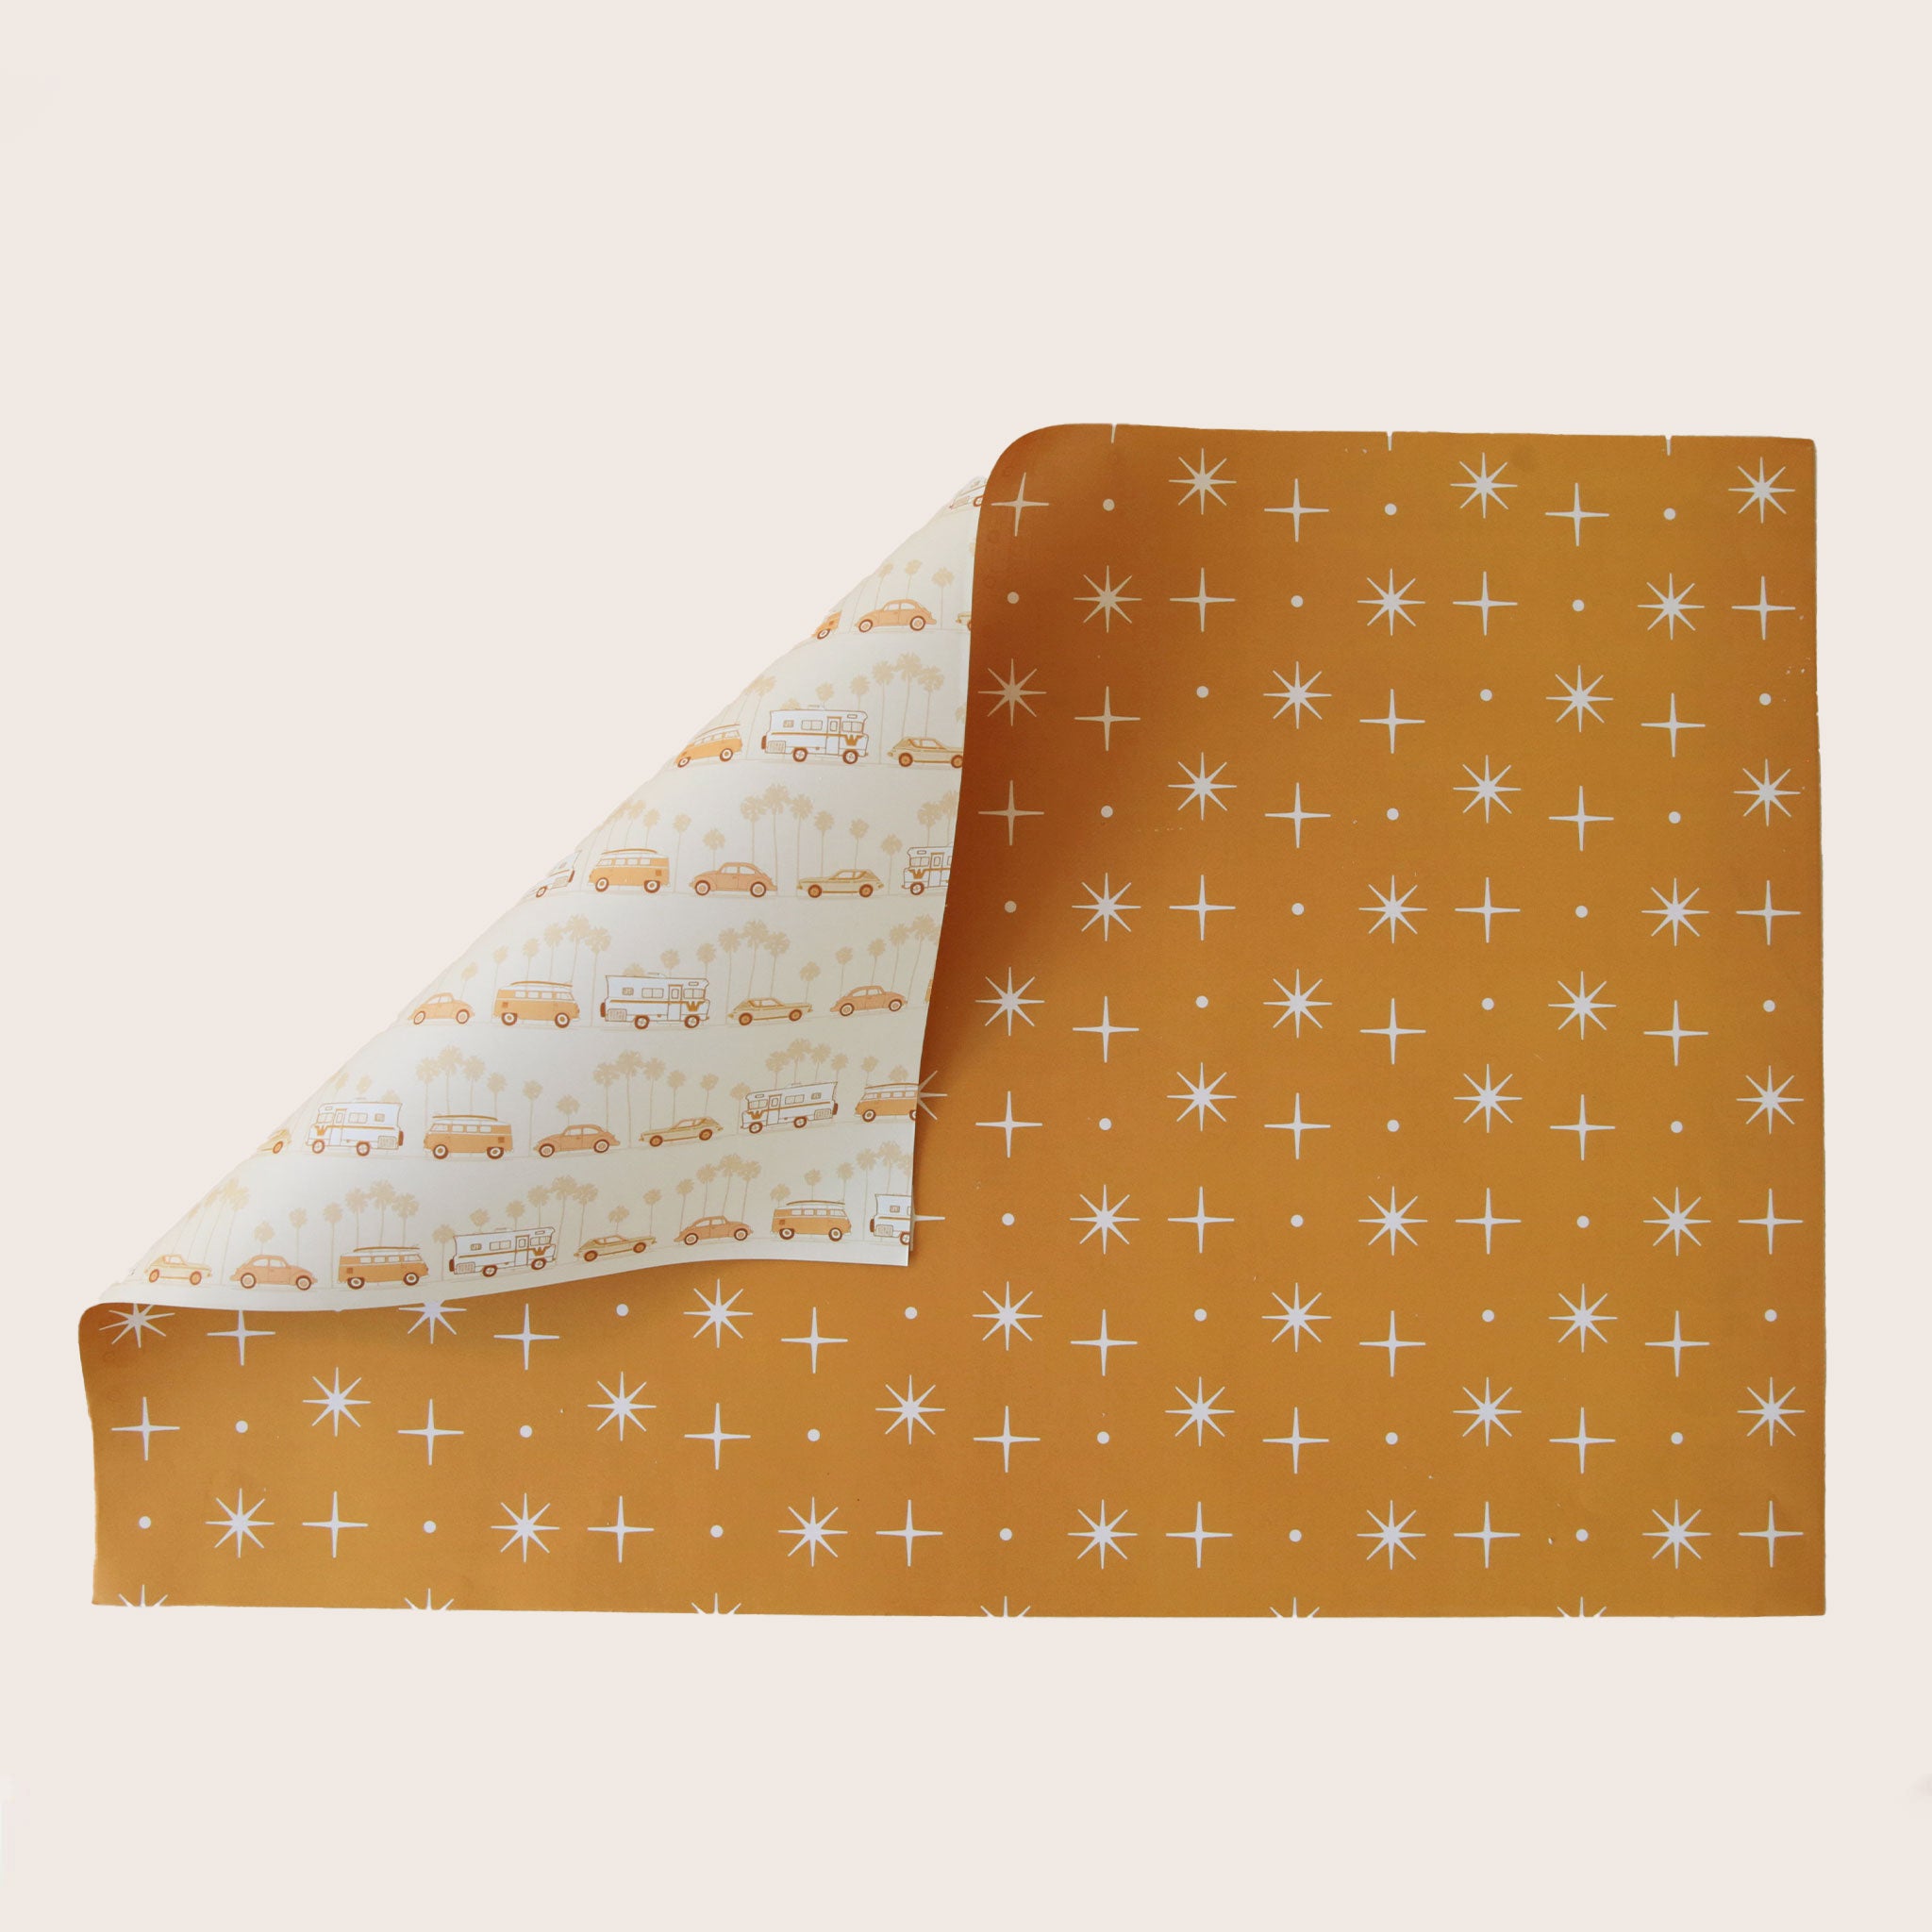 A single sheet of gift wrap featuring a mustard yellow background with a repeating white star design. On the flip side, you have the option of a cream background with groovy vehicles including vintage inspired RV's, and VW bugs and buses.